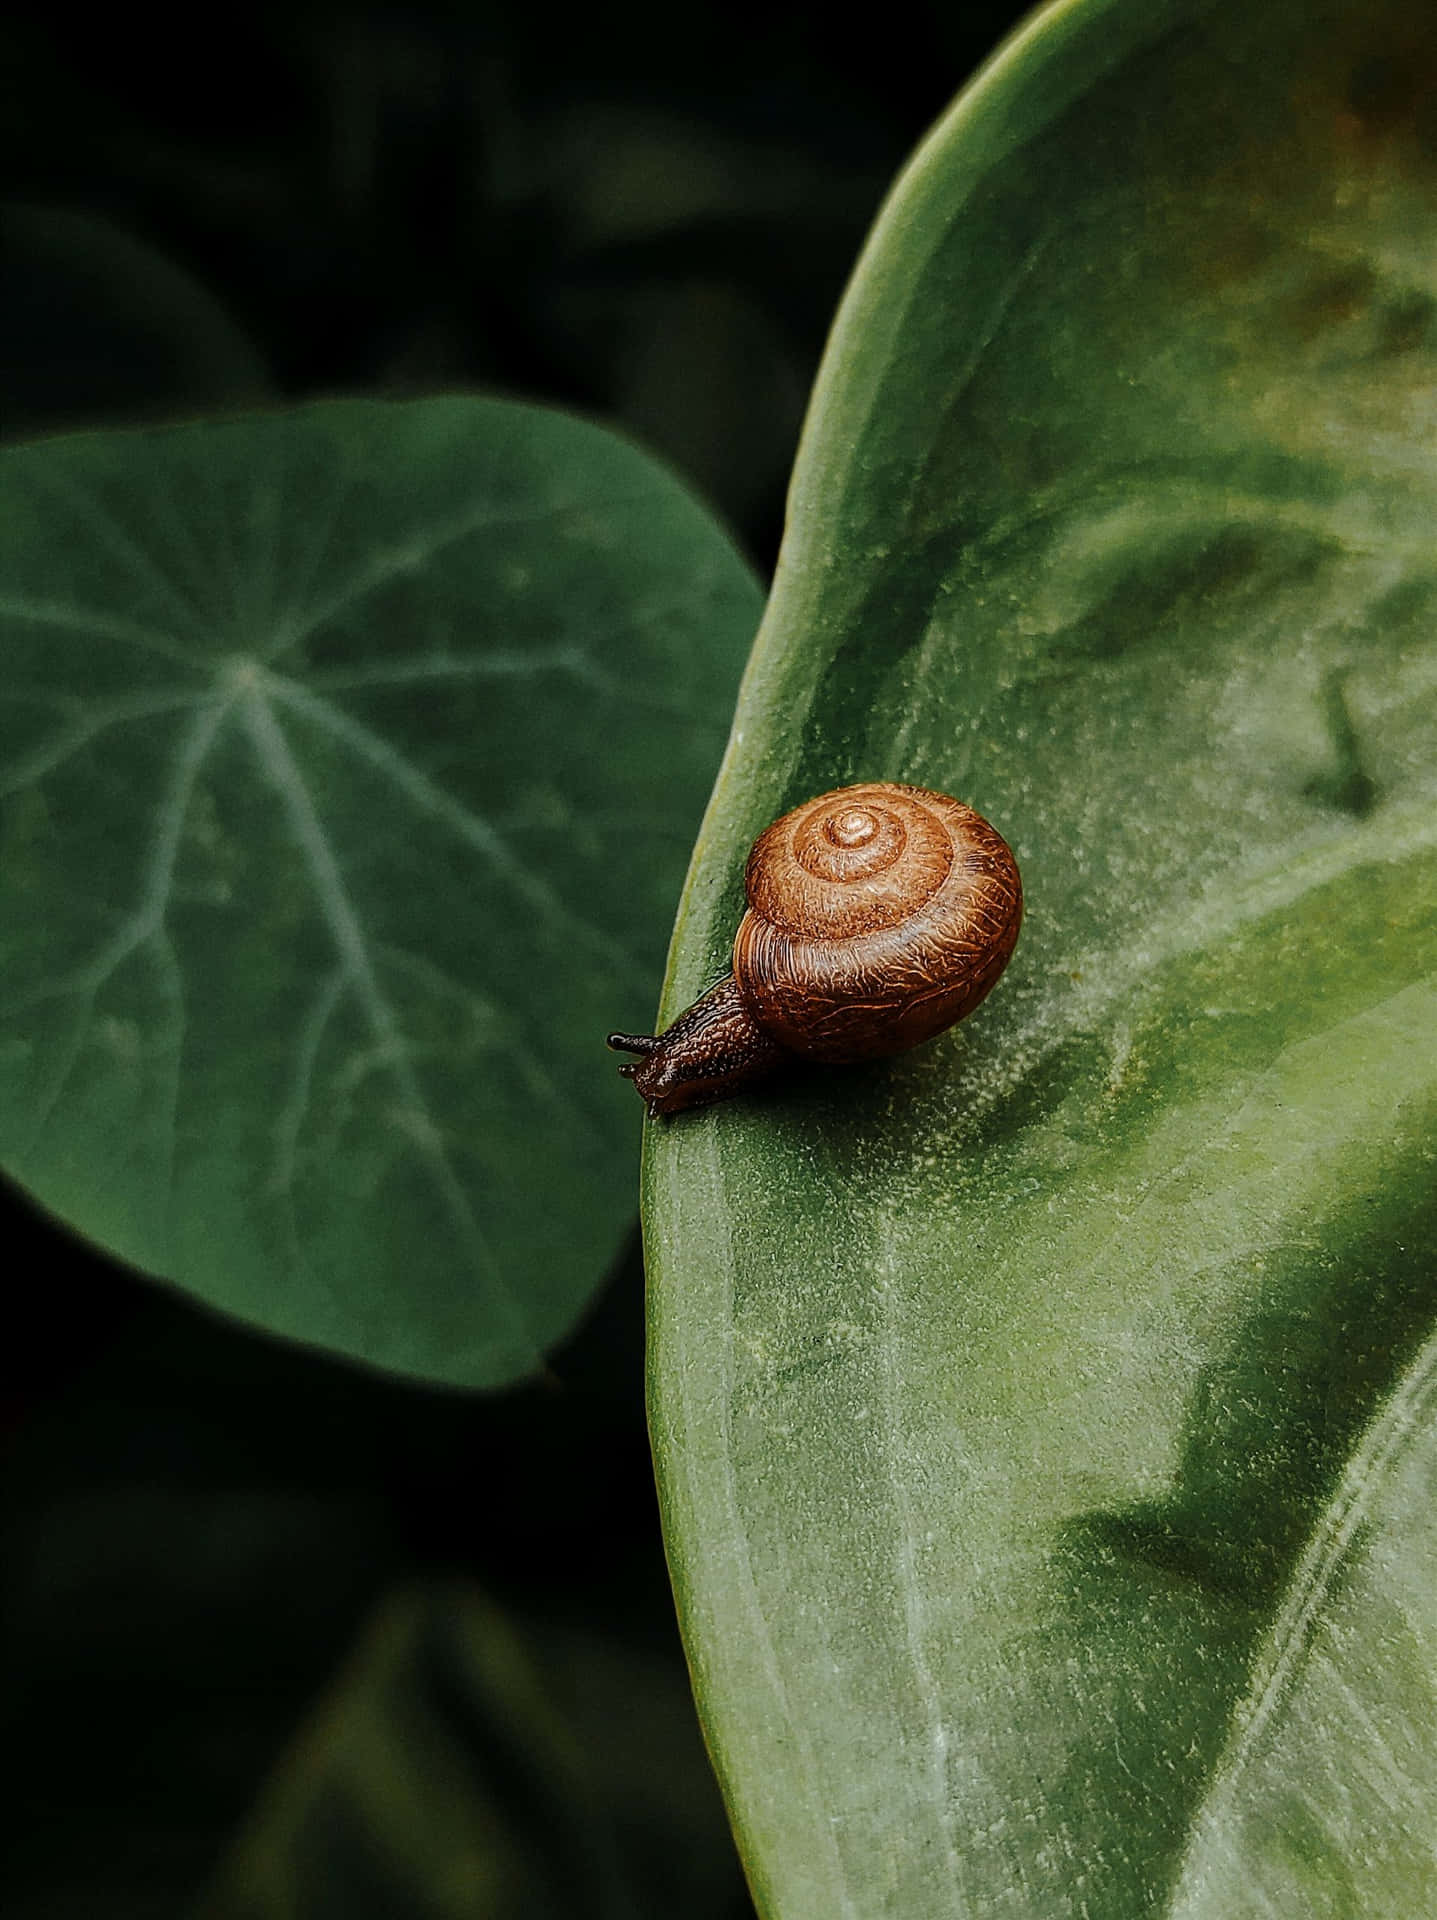 A beautiful brown and white snail, making its slow and steady progress